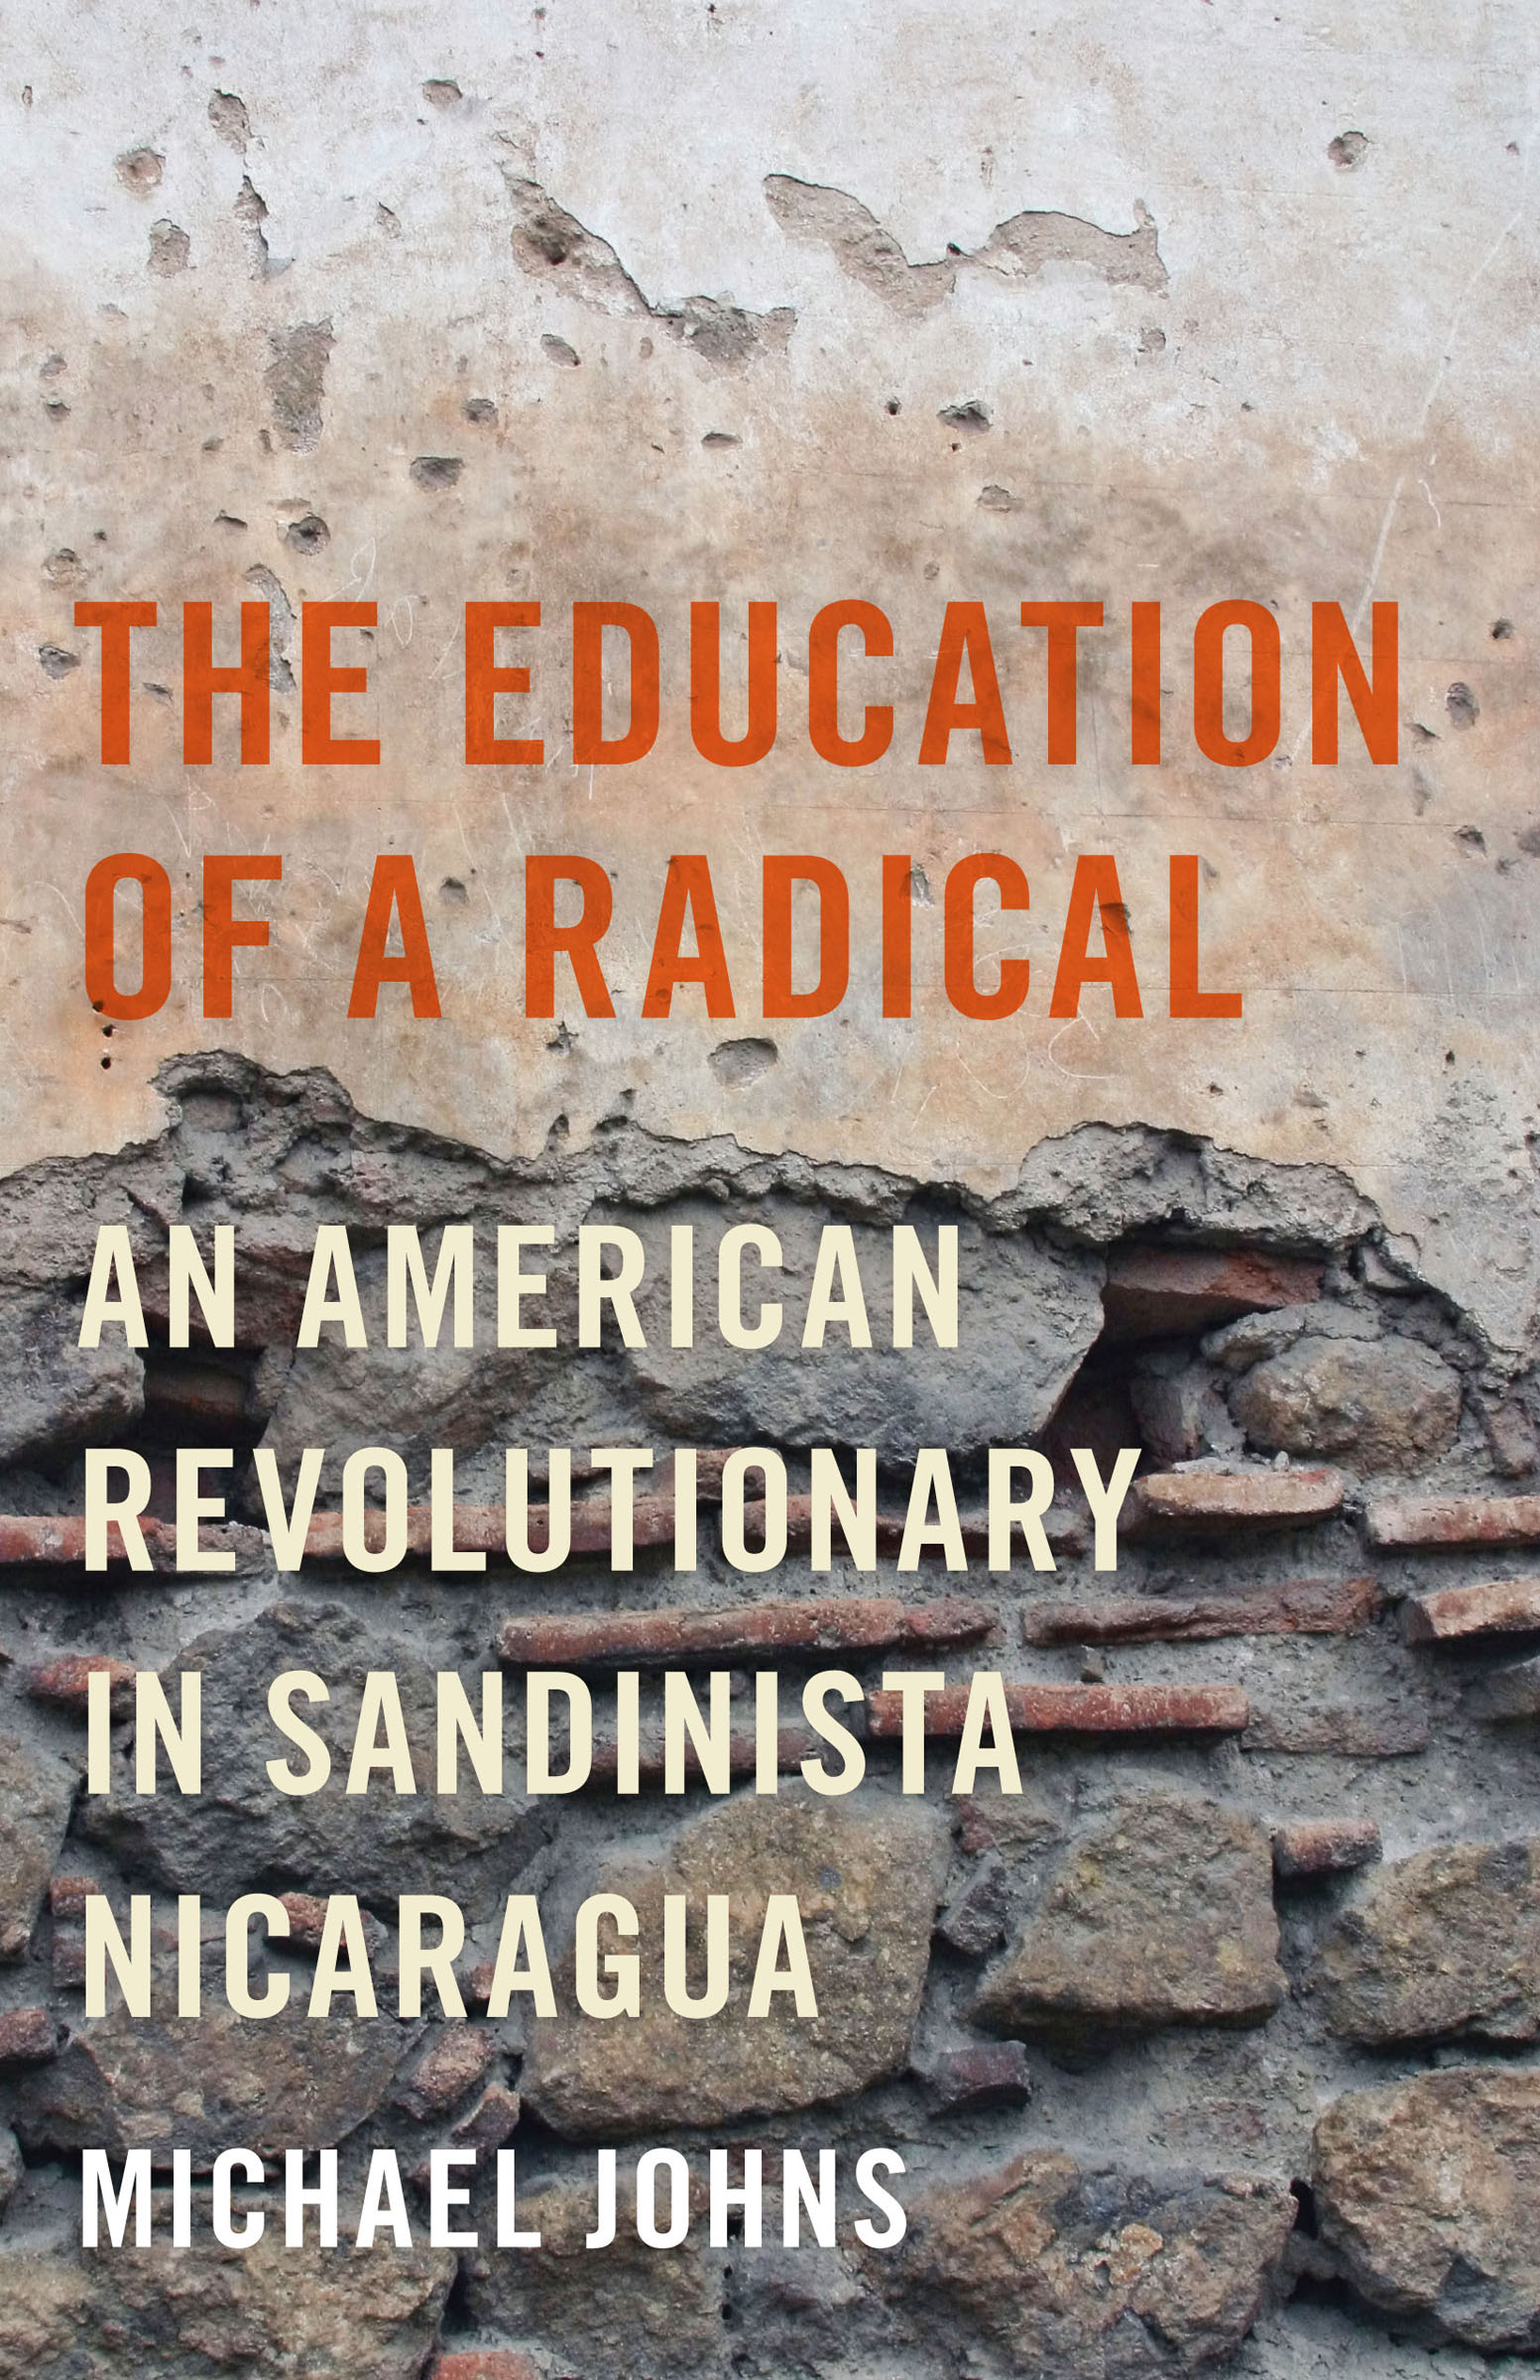 The Education of a Radical